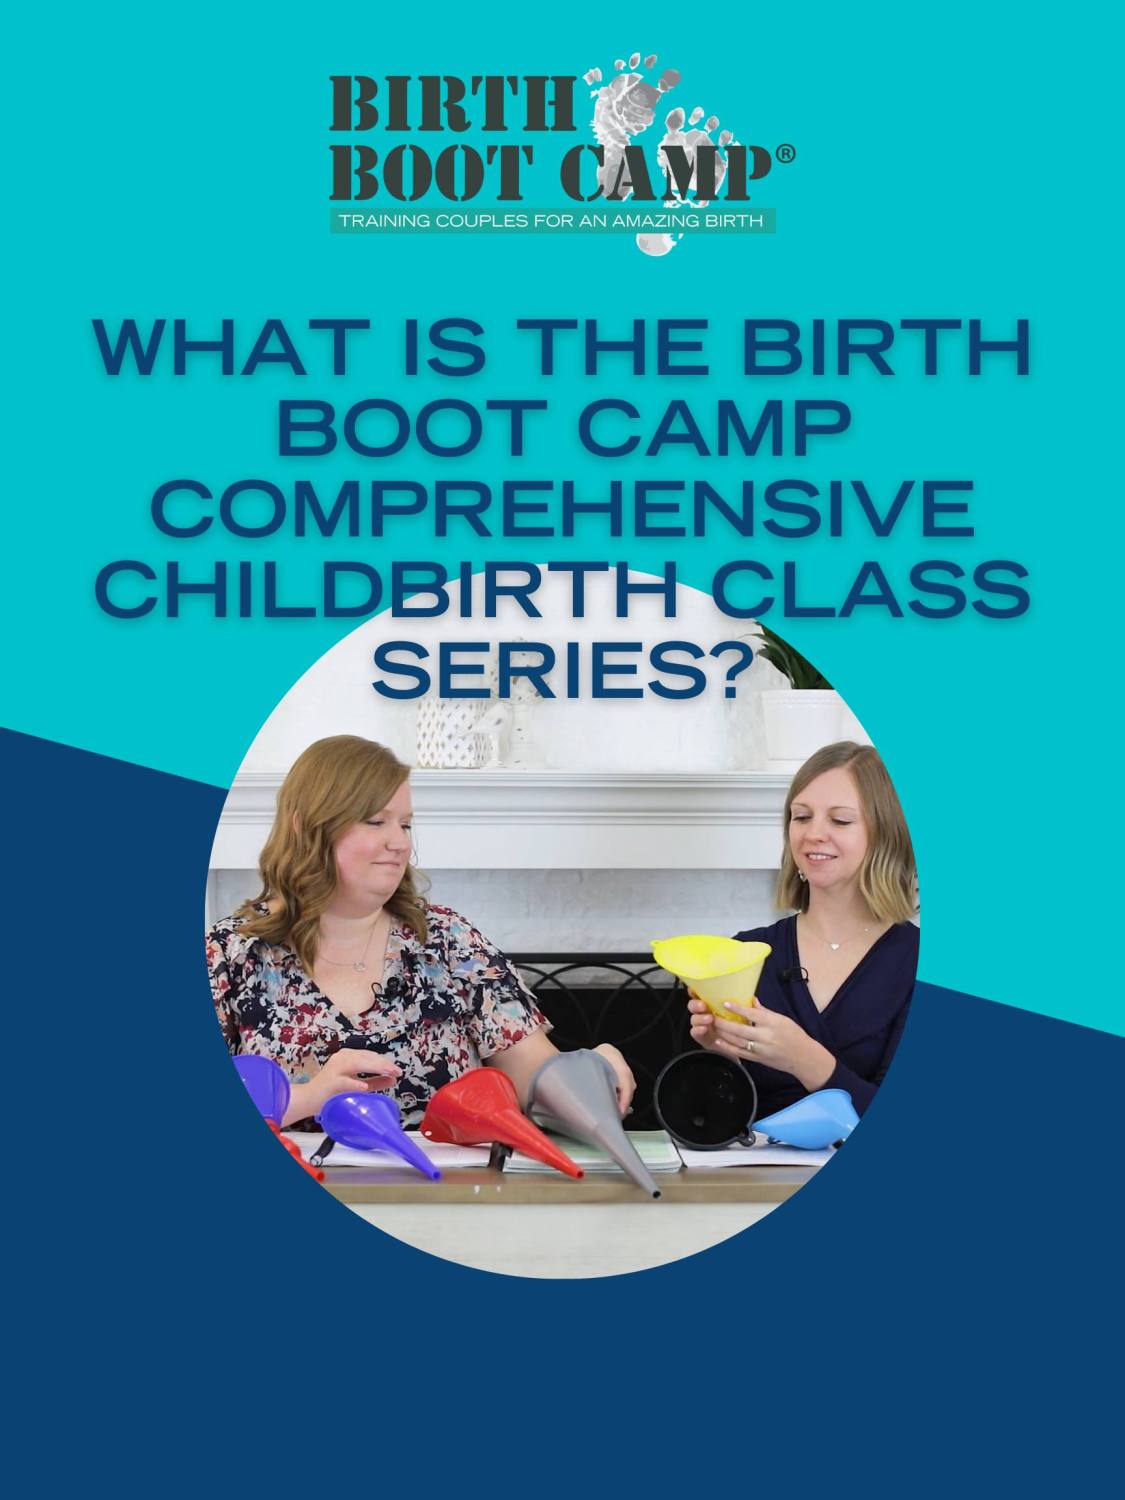 What Is The Birth Boot Camp Comprehensive Childbirth Class Series?